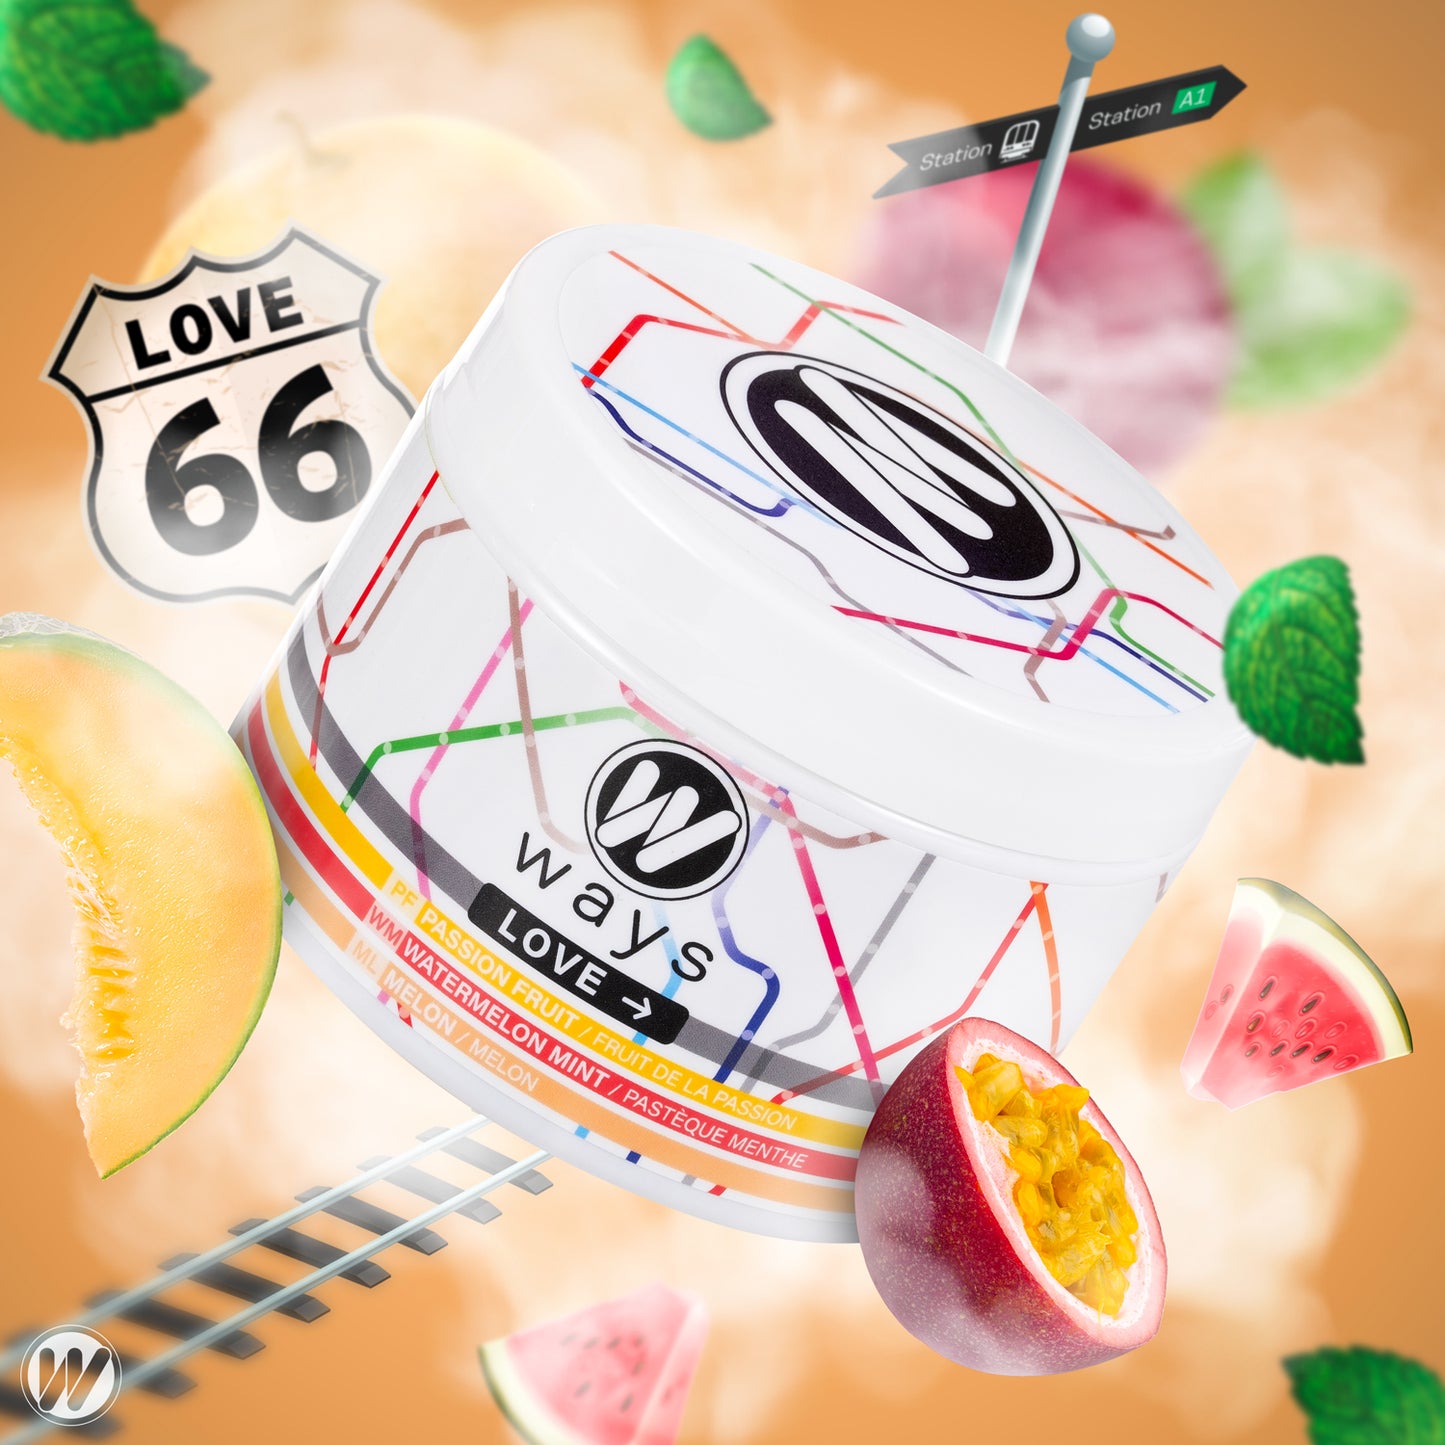 Ways Love 66 Shisha Flavour Passionfruit, watermelon and melon Tobacco Free 200g